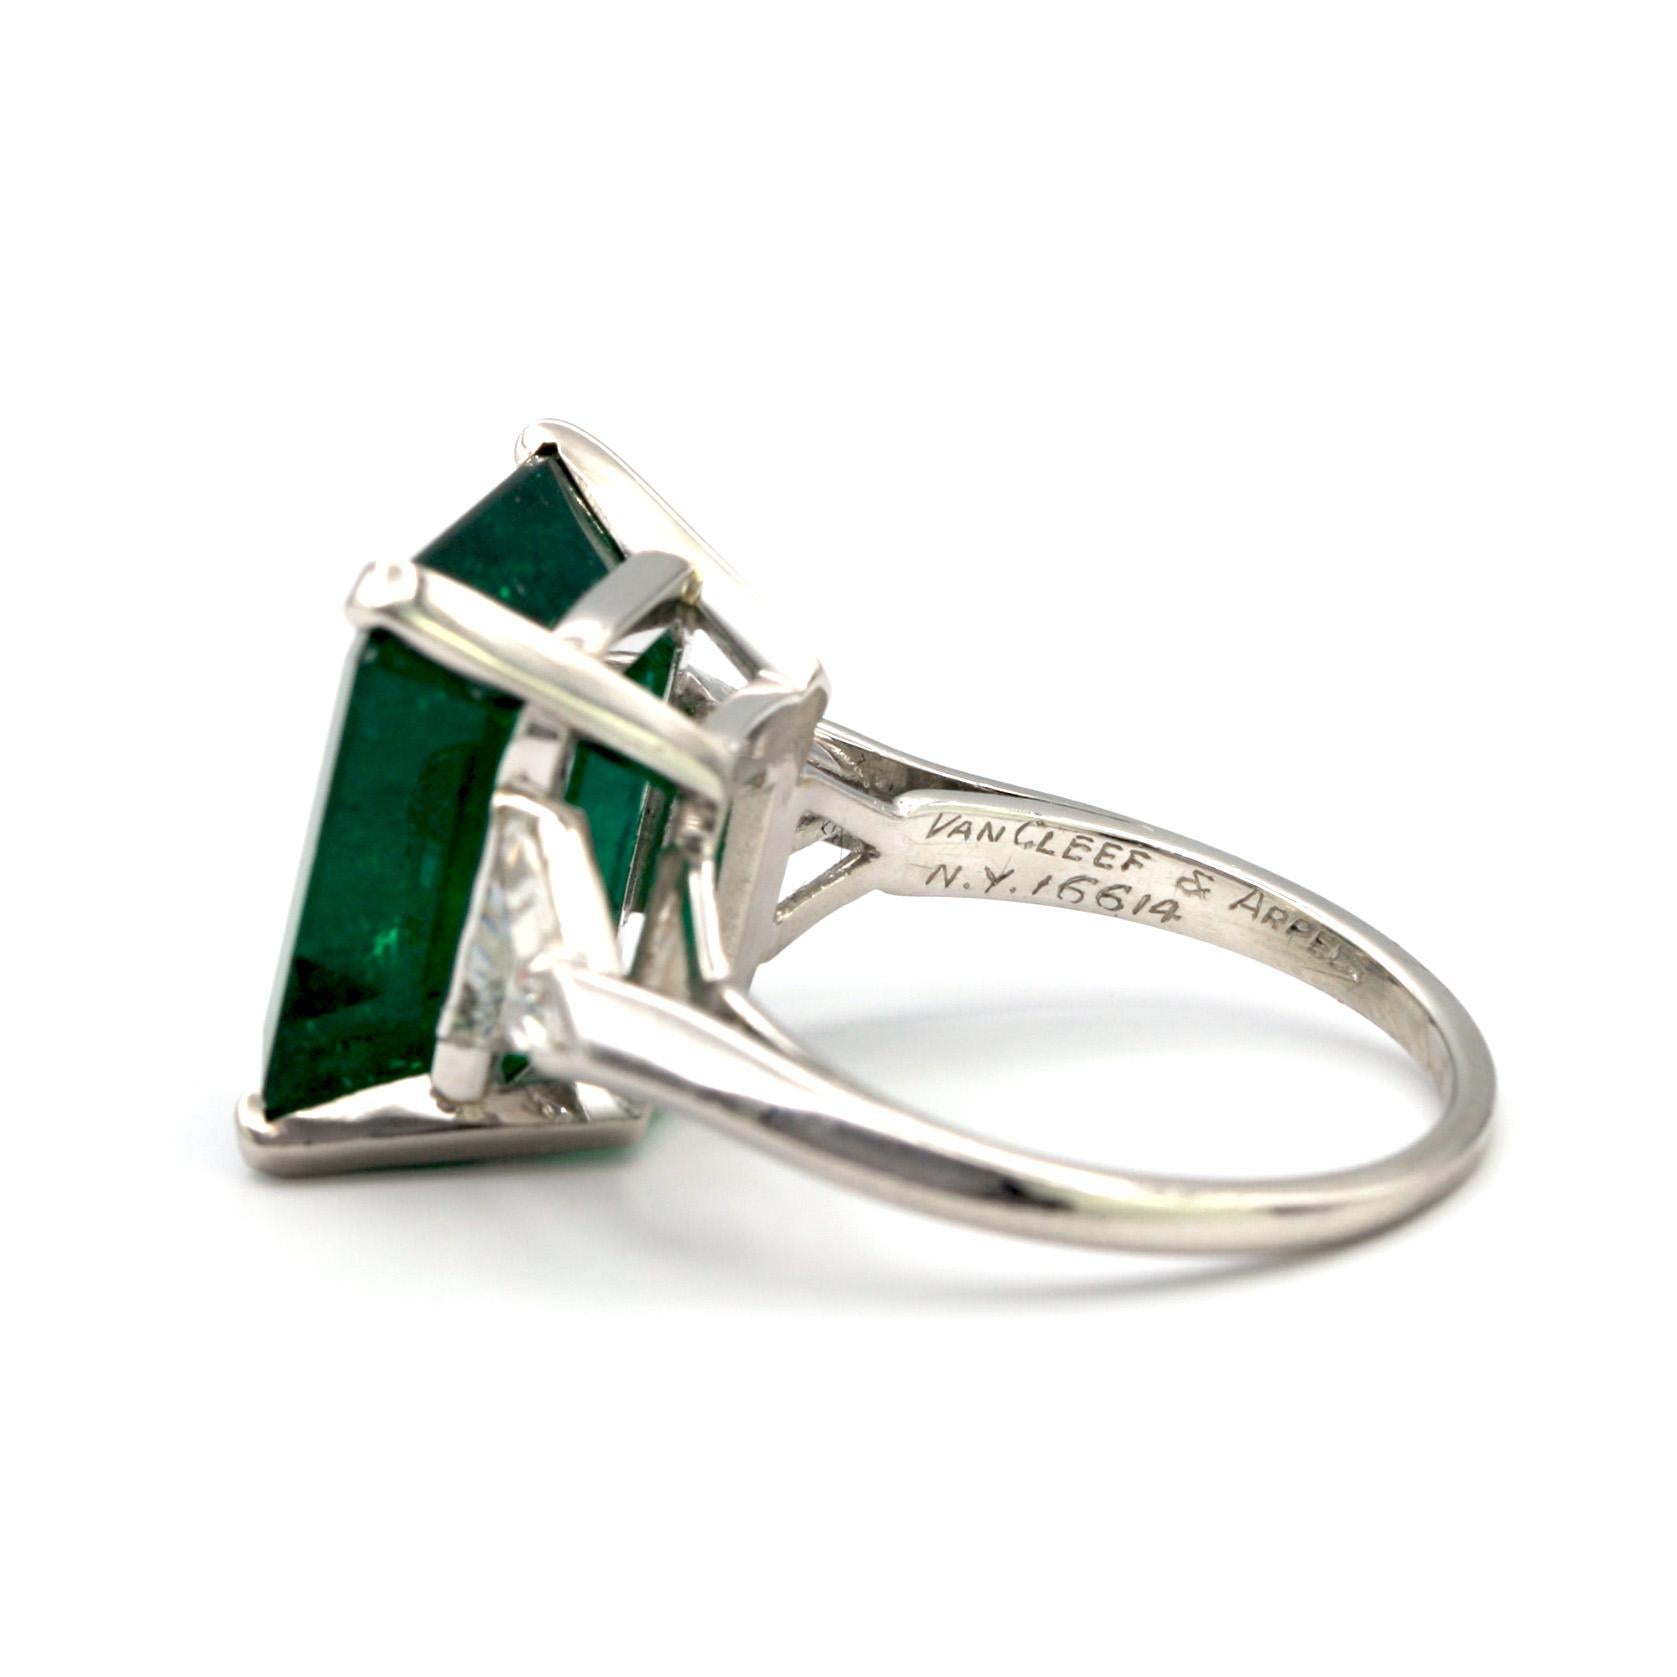 Van Cleef & Arpels 9.85 carat Colombian Emerald Ring with two side triangle White diamonds approx .05ct each. 
Mounted in Platinum

Stamped 